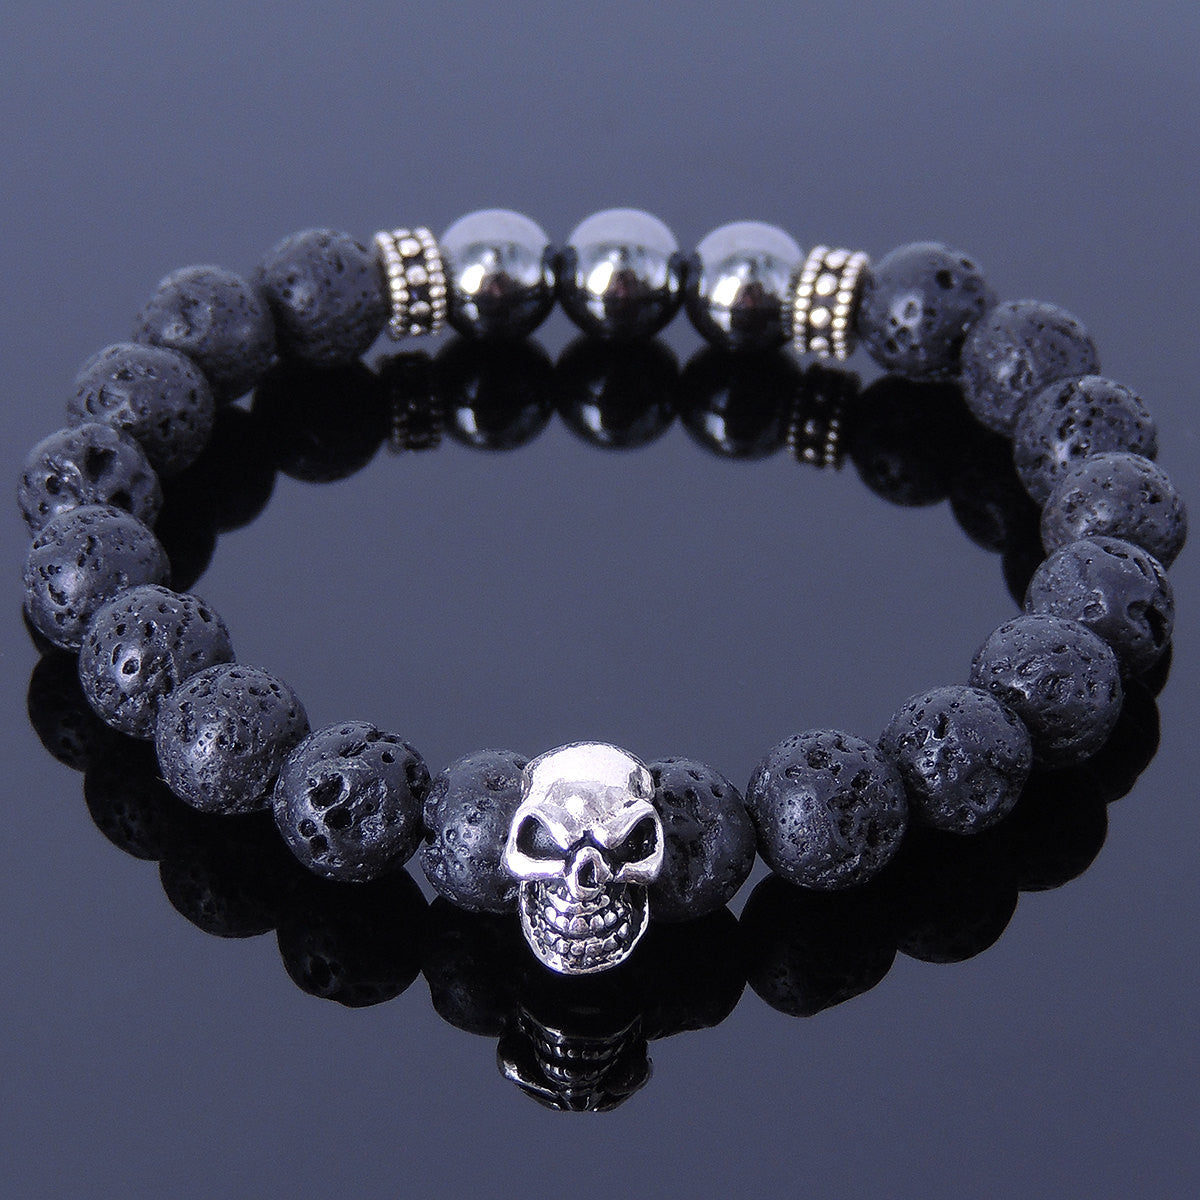 8mm Hematite & Lava Rock Healing Gemstone Bracelet with S925 Sterling Silver Spacers & Protection Skull Bead - Handmade by Gem & Silver BR317